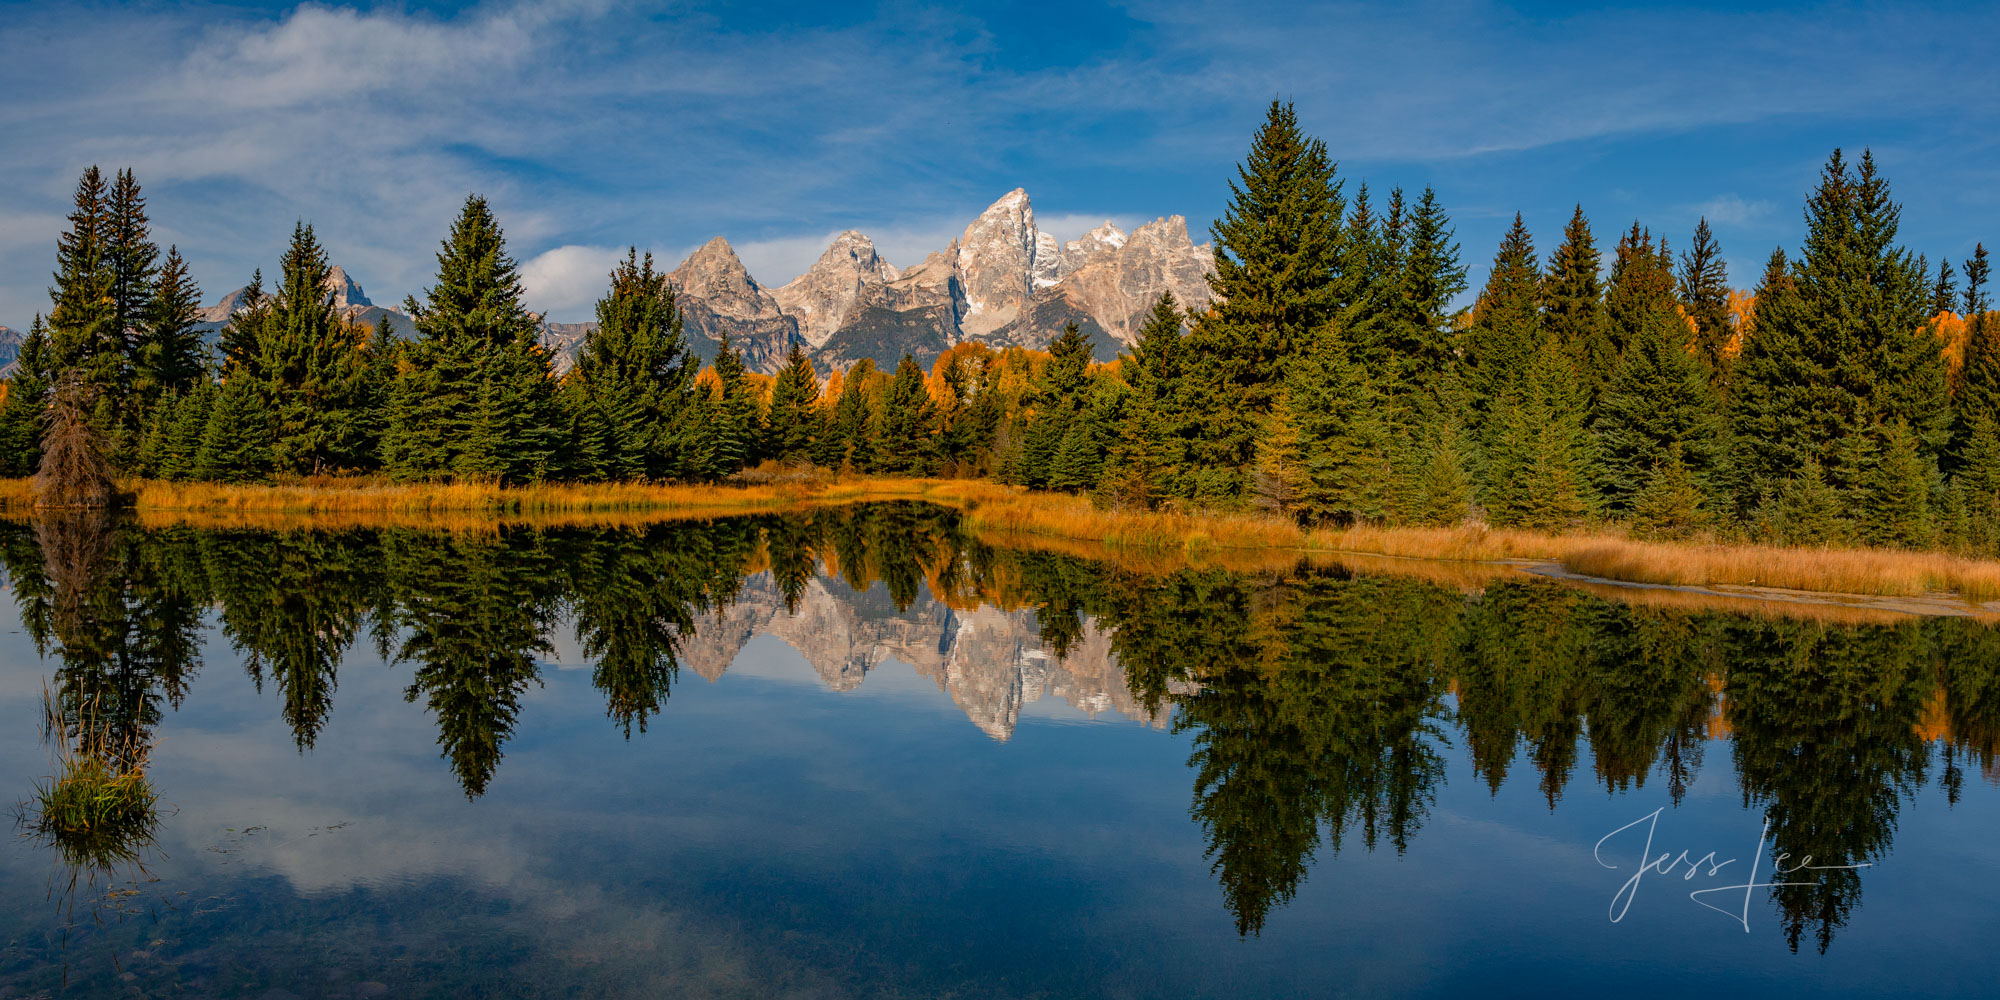 100 Fine Art Photo prints of the Teton Mountain Range Reflecting in a beaver pond. A crisp cool autumn morning with a few thin...